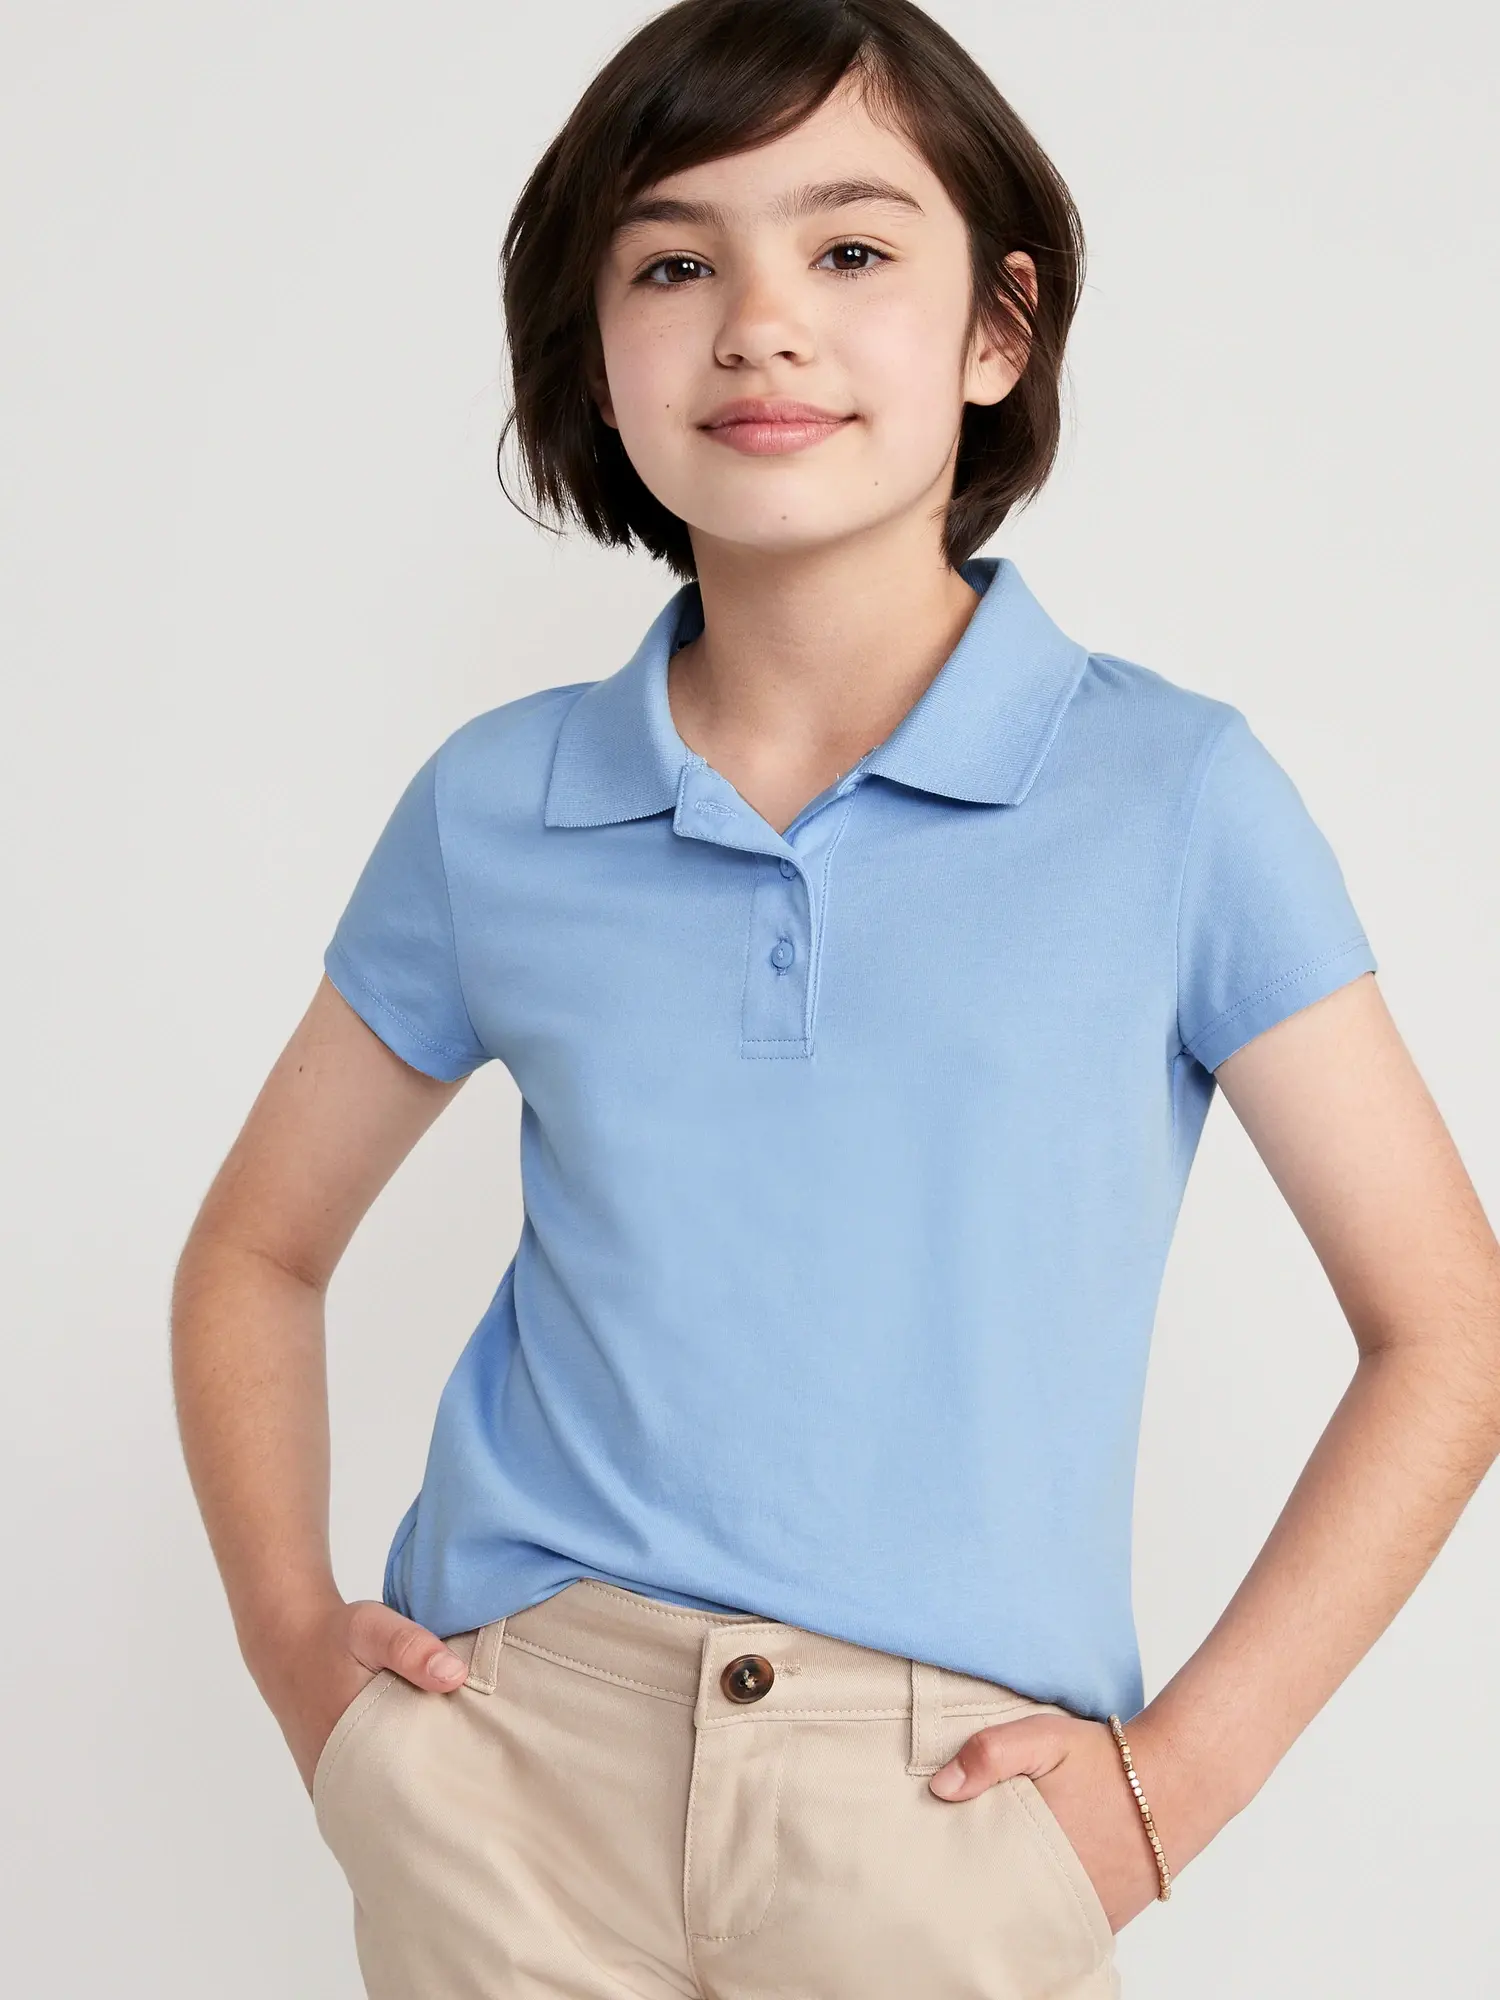 Old Navy Uniform Jersey Polo Shirt for Girls blue. 1